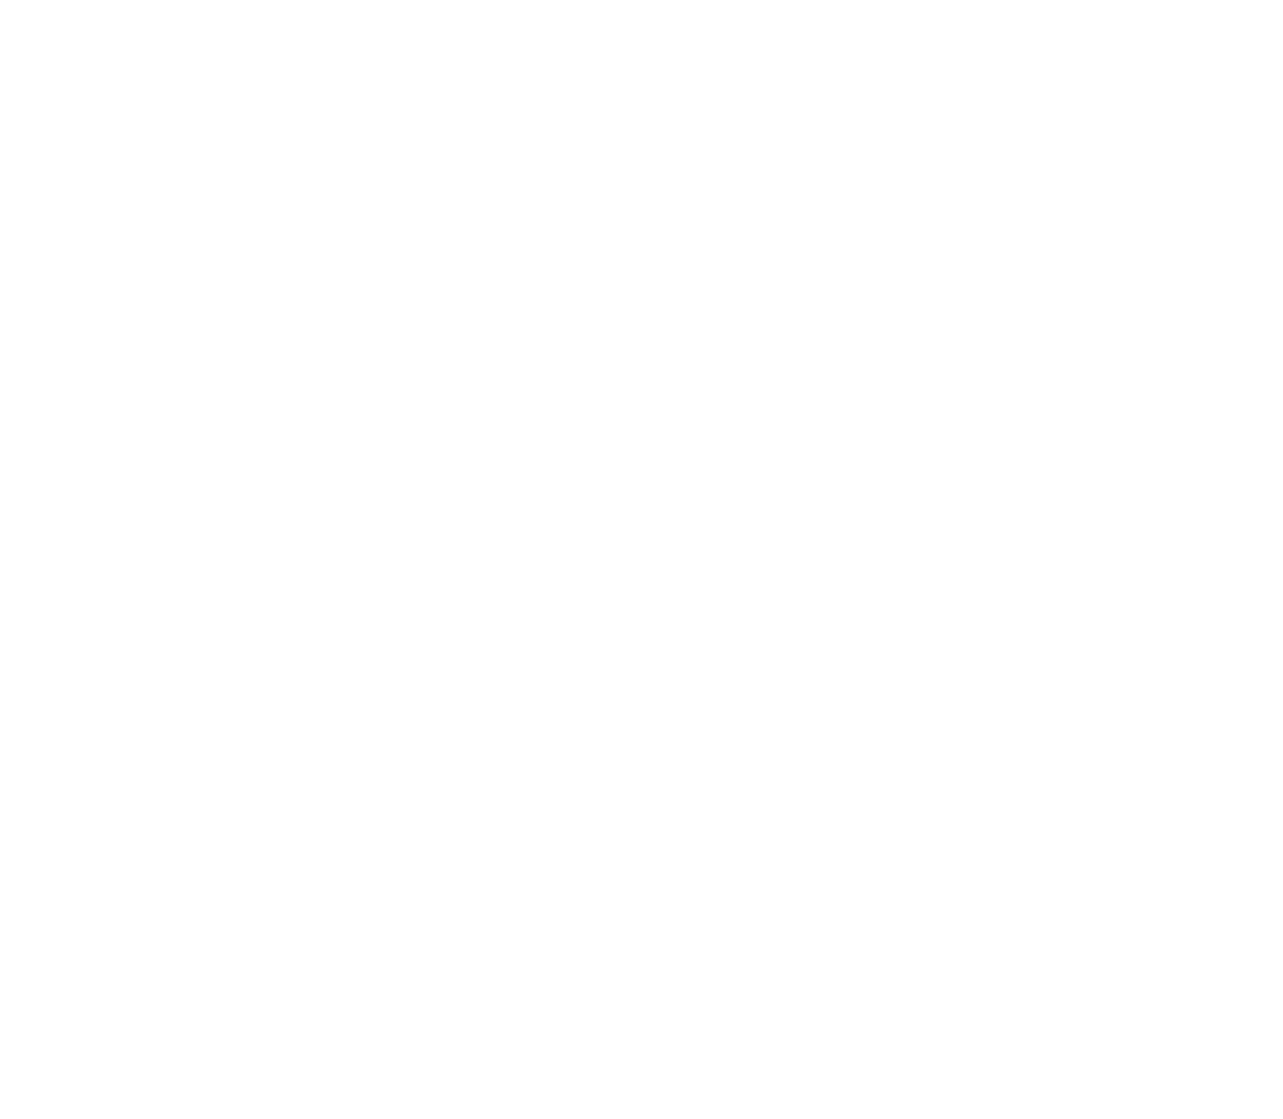 To celebrate the upcoming release of <Star Wars: The Last Jedi>, the robot vacuum cleaner POWERbot( VR7000 ) received a complete makeover as the faces of Darth Vader and the Stormtrooper. This special robot vacuum cleaner is a tribute to the < Star Wars > universe, and has been designed  to convey the look and feel of the beloved movie series to users as they experience the product from its exterior design, sound effects , to the package itself. By endowing the personalities of familiar characters into a robot vacuum cleaner, which is the only home appliance that ‘moves independently ’, the POWERbot Star Wars Edition provides a visceral and dramatic experience to its users. Sense the ‘Force’ that flows from this powerful design of the POWERbot.